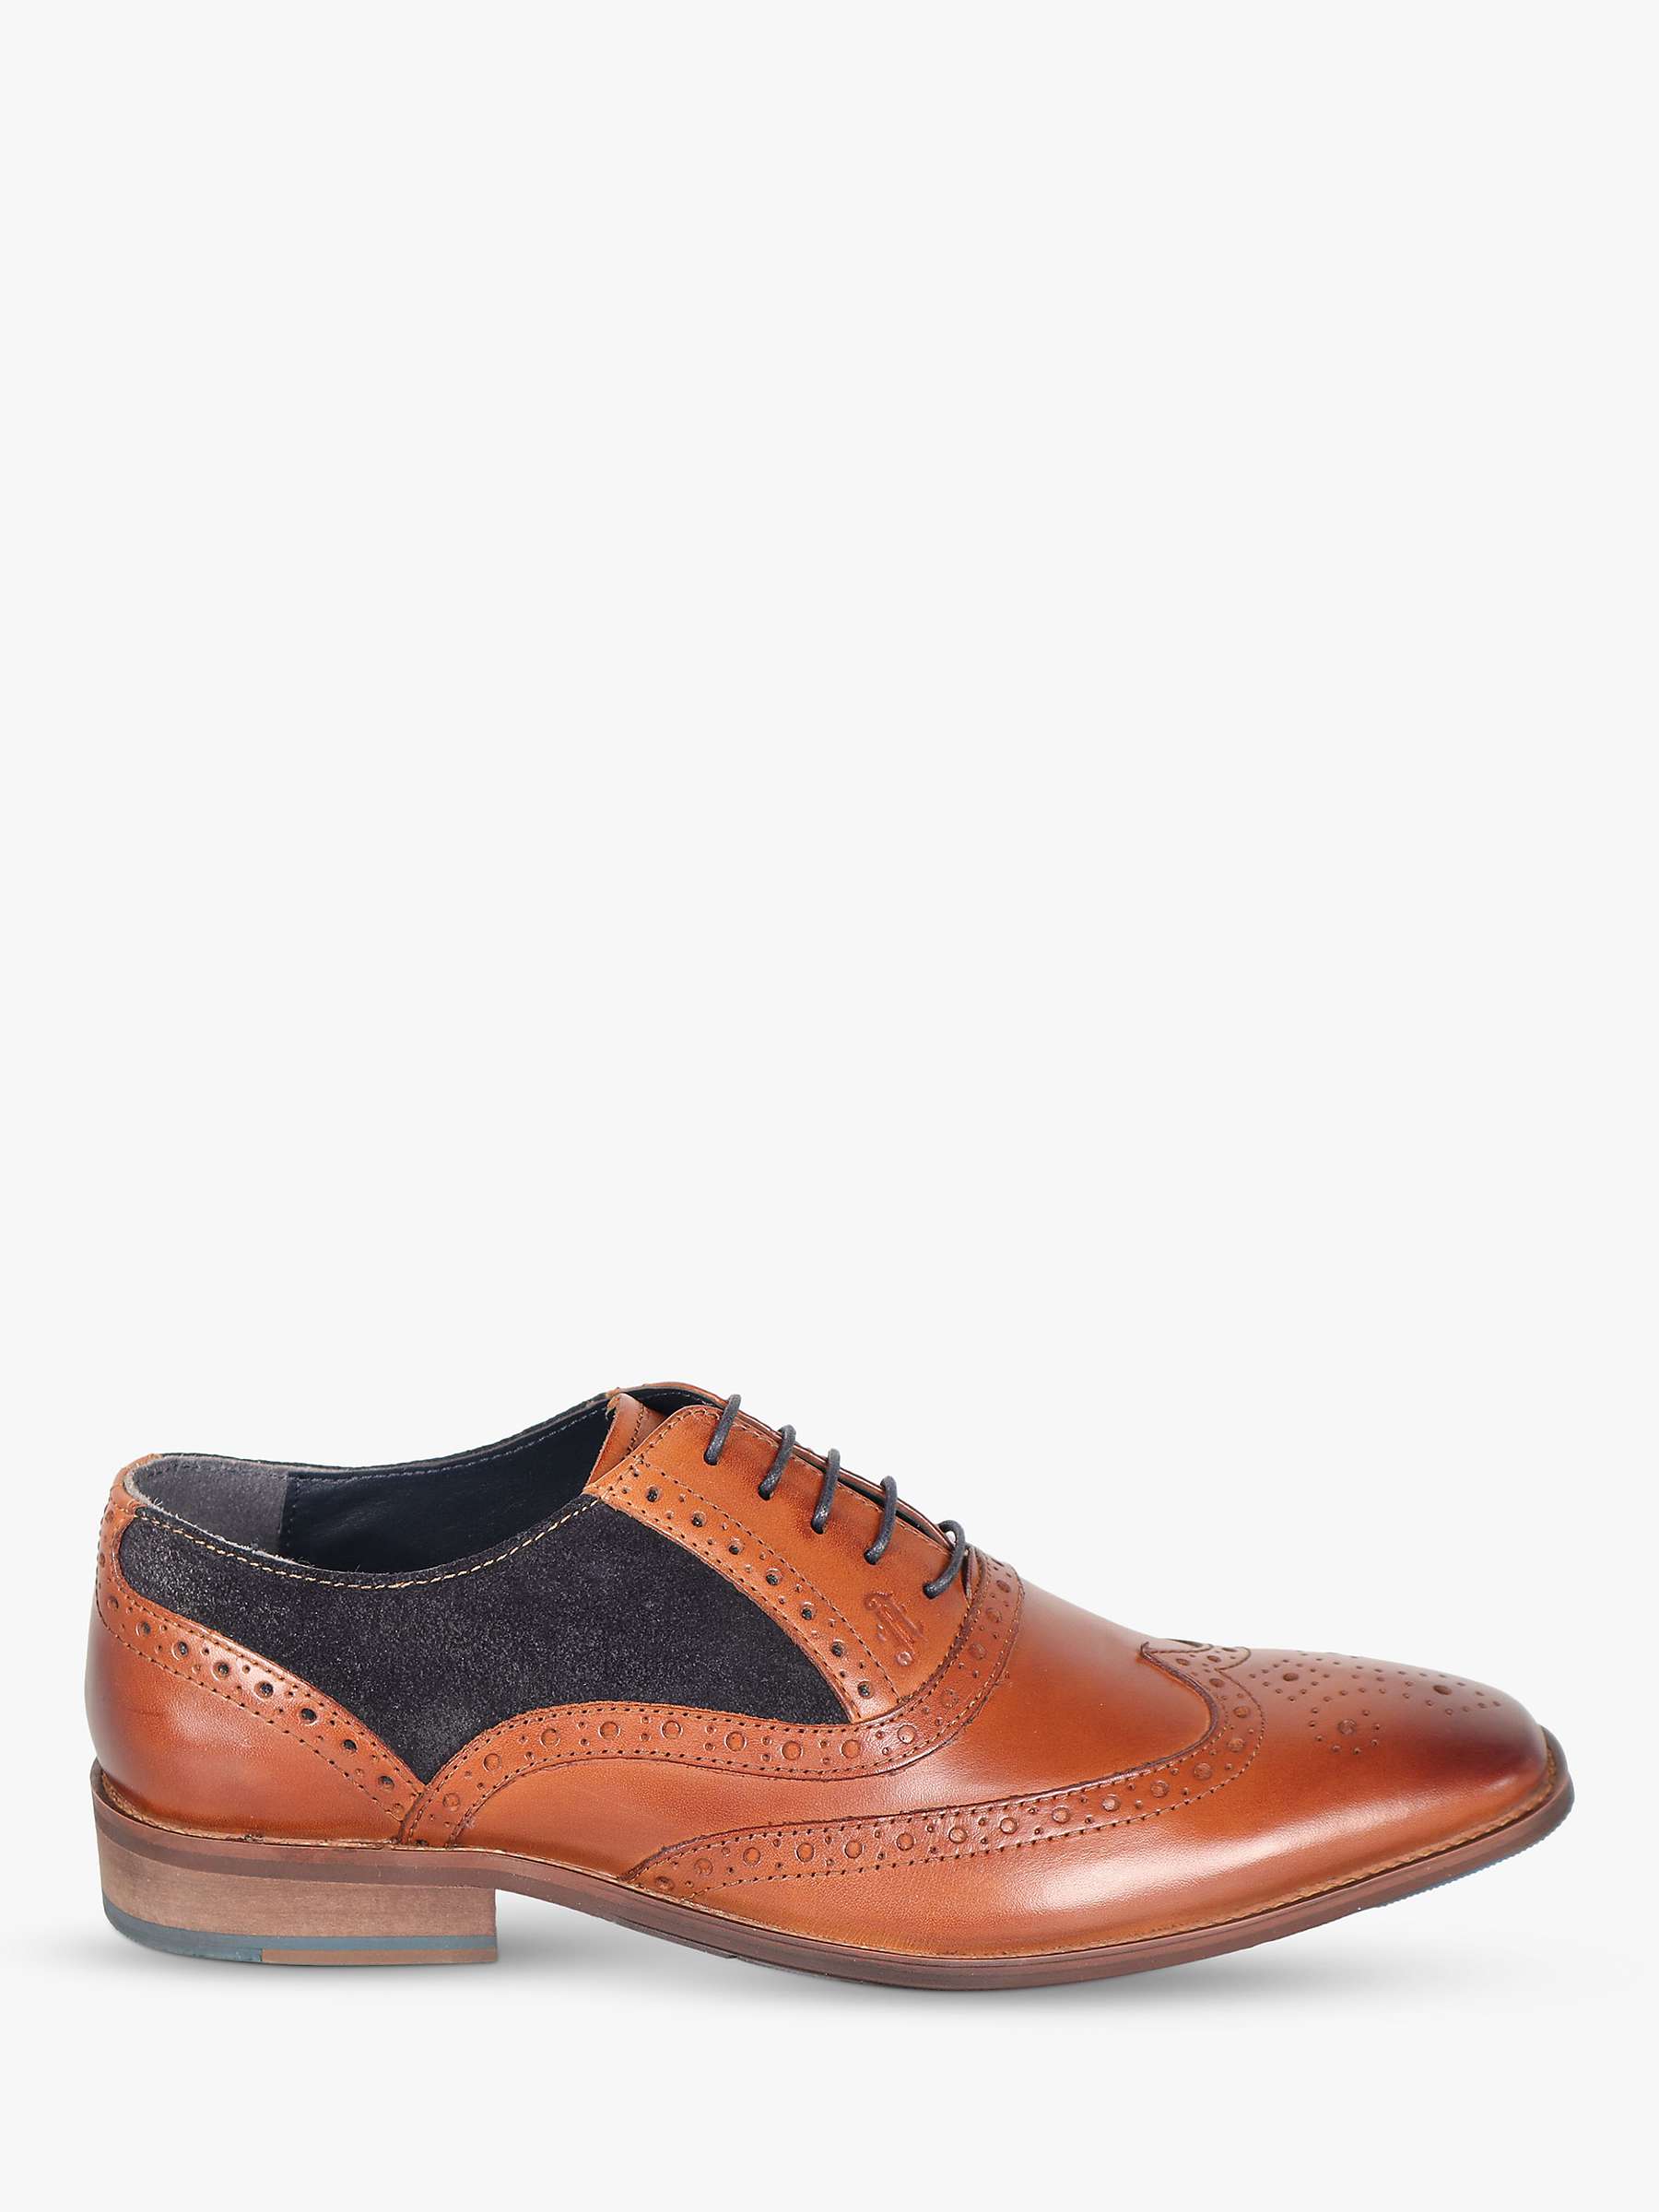 Buy Silver Street London Amen Collection Silgo Leather Brogues, Tan/Black Online at johnlewis.com